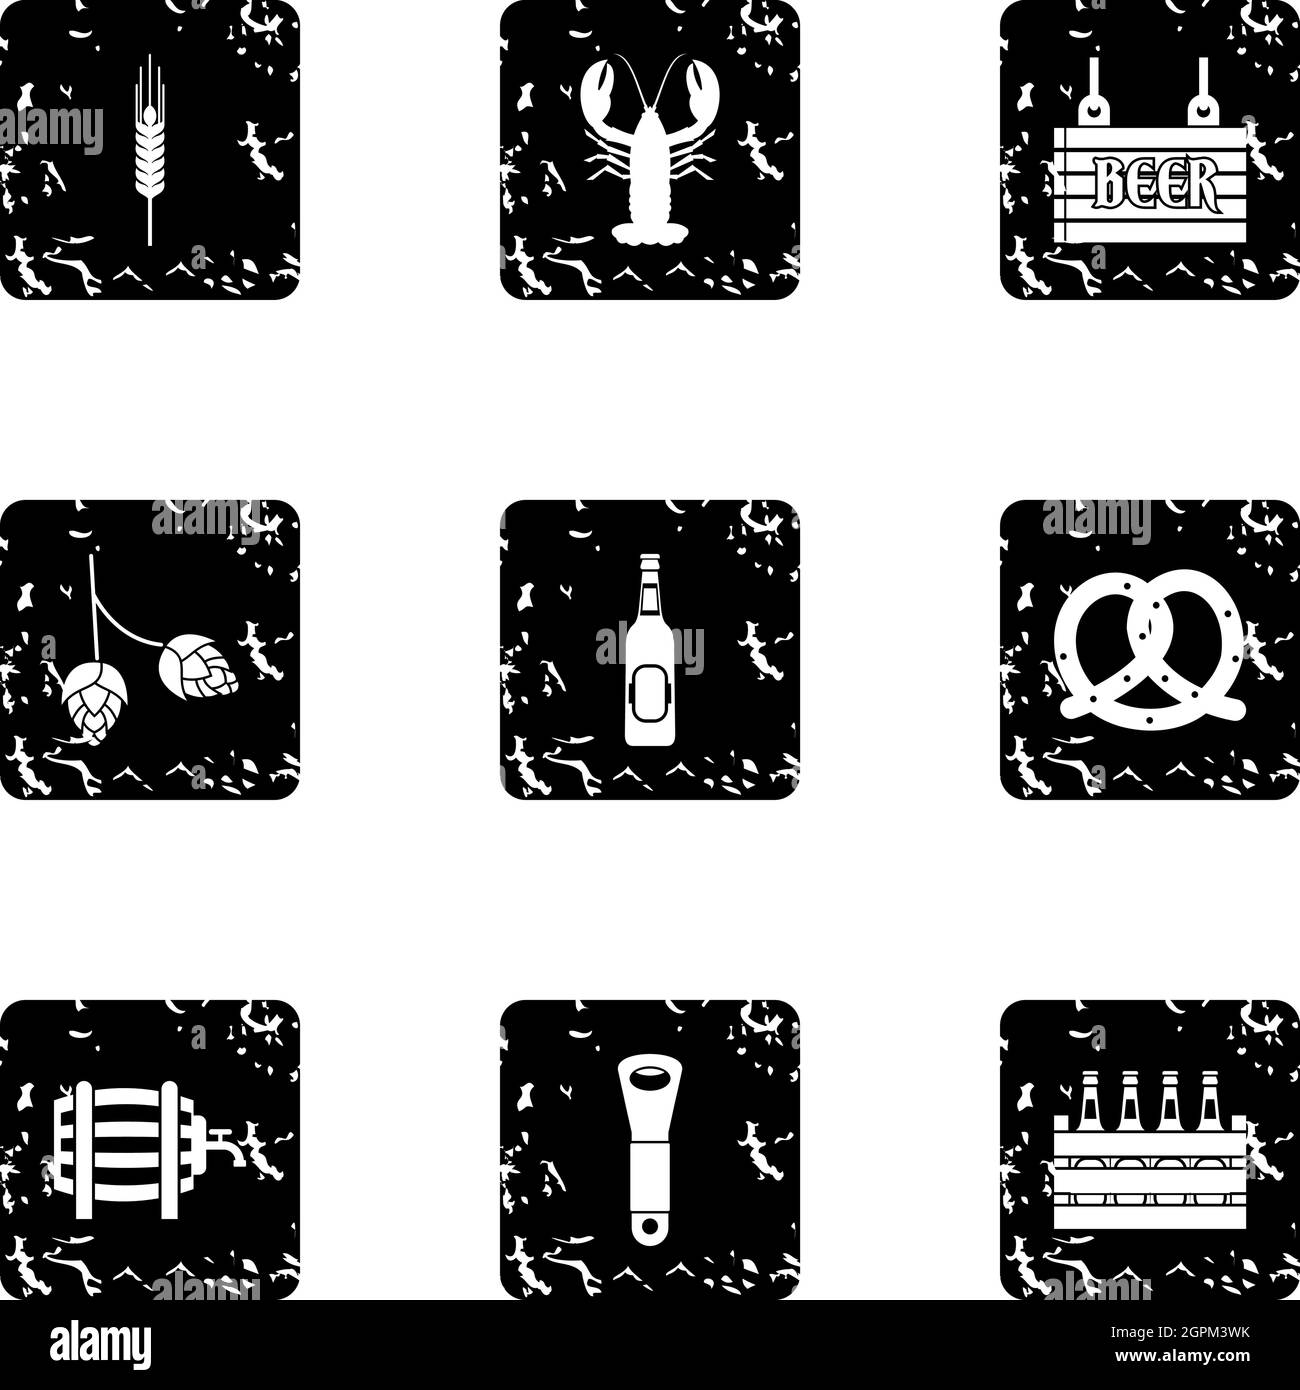 Beer icons set, grunge style Stock Vector